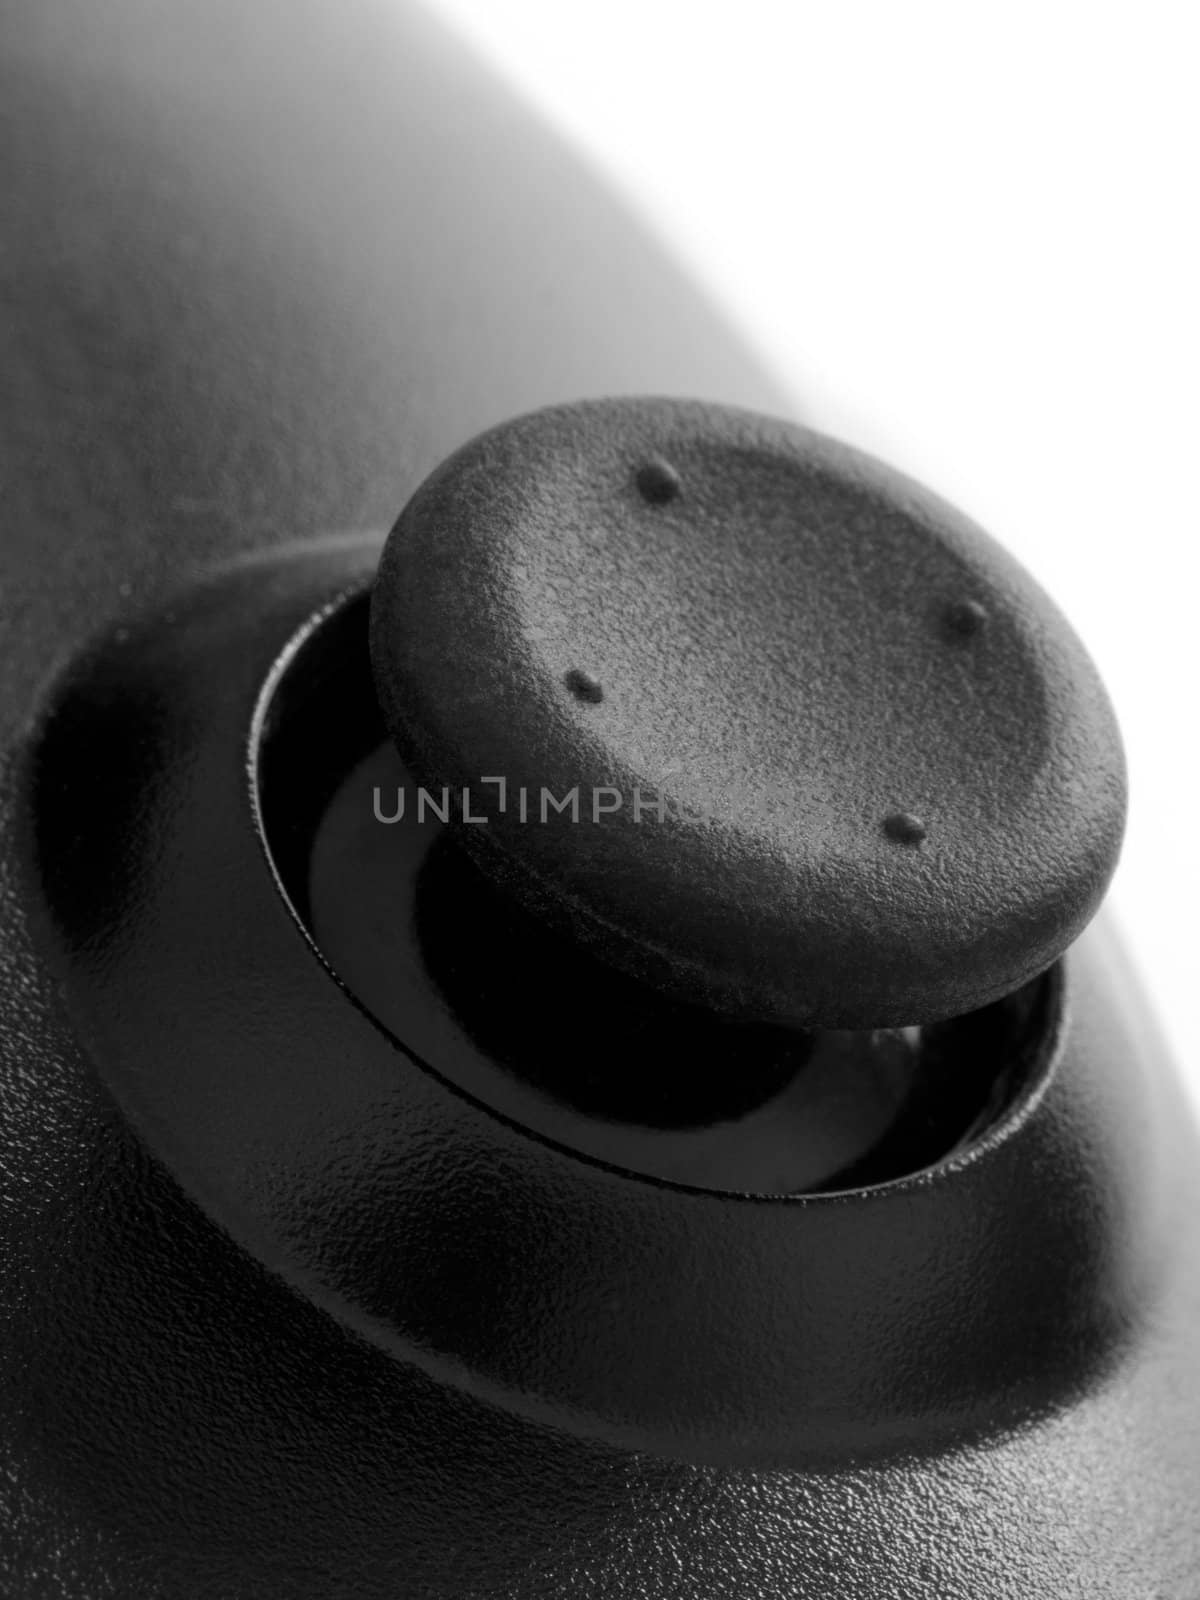 video game controller thumbpad by zkruger